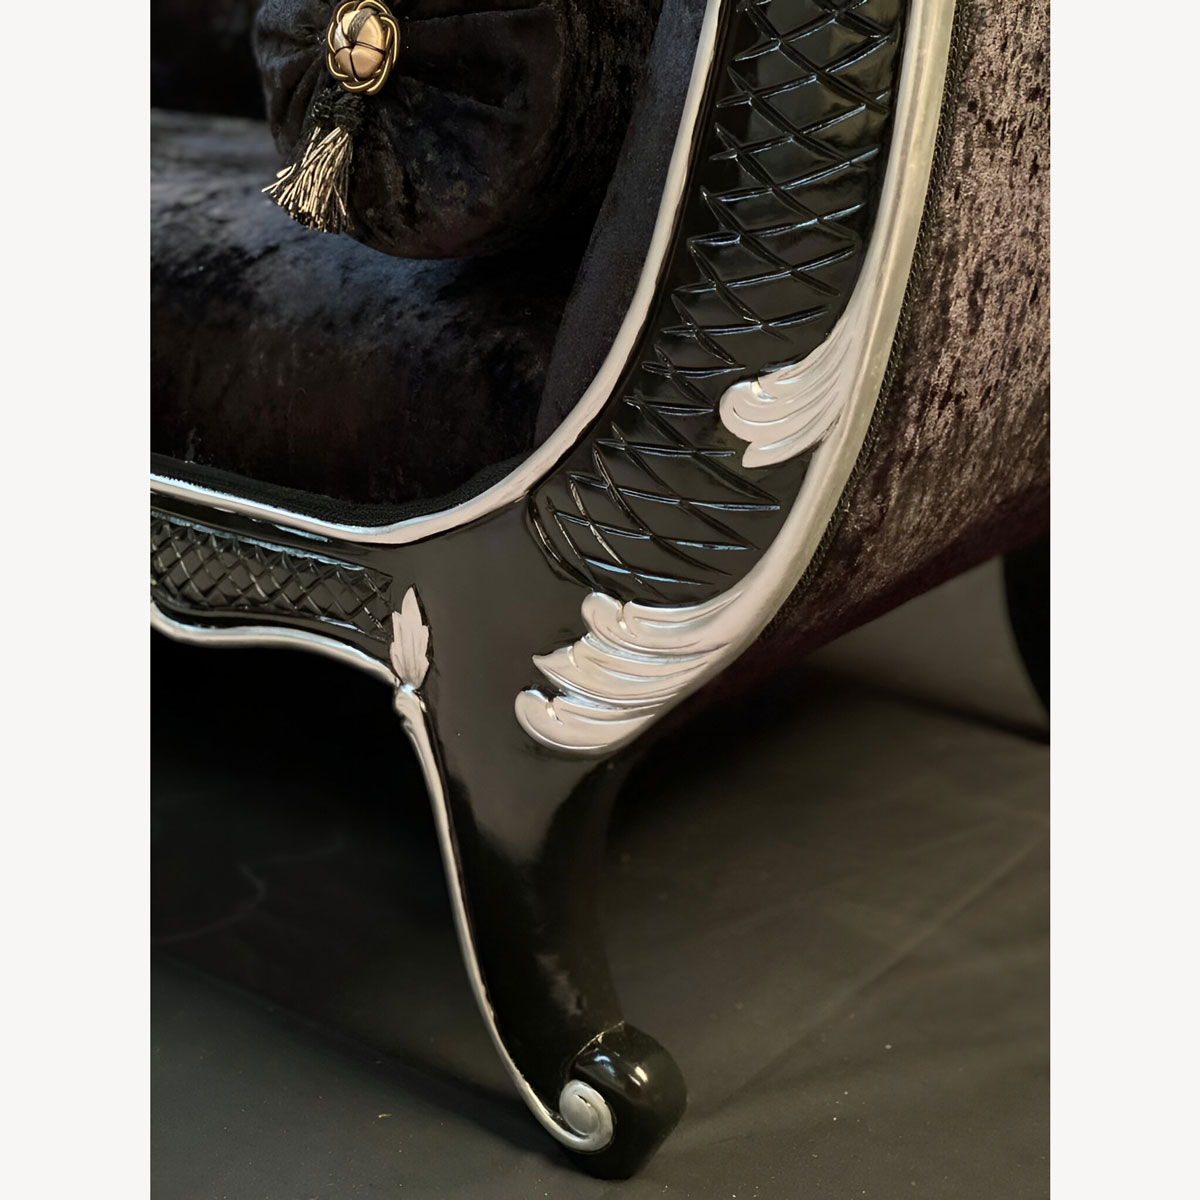 Armani Chaise Longue In Black With Silver Detailing And Blackberry Crushed Velvet Crystal Buttons Smaller Version 3 - Hampshire Barn Interiors - Armani Chaise Longue In Black With Silver Detailing And Blackberry Crushed Velvet Crystal Buttons Smaller Version -